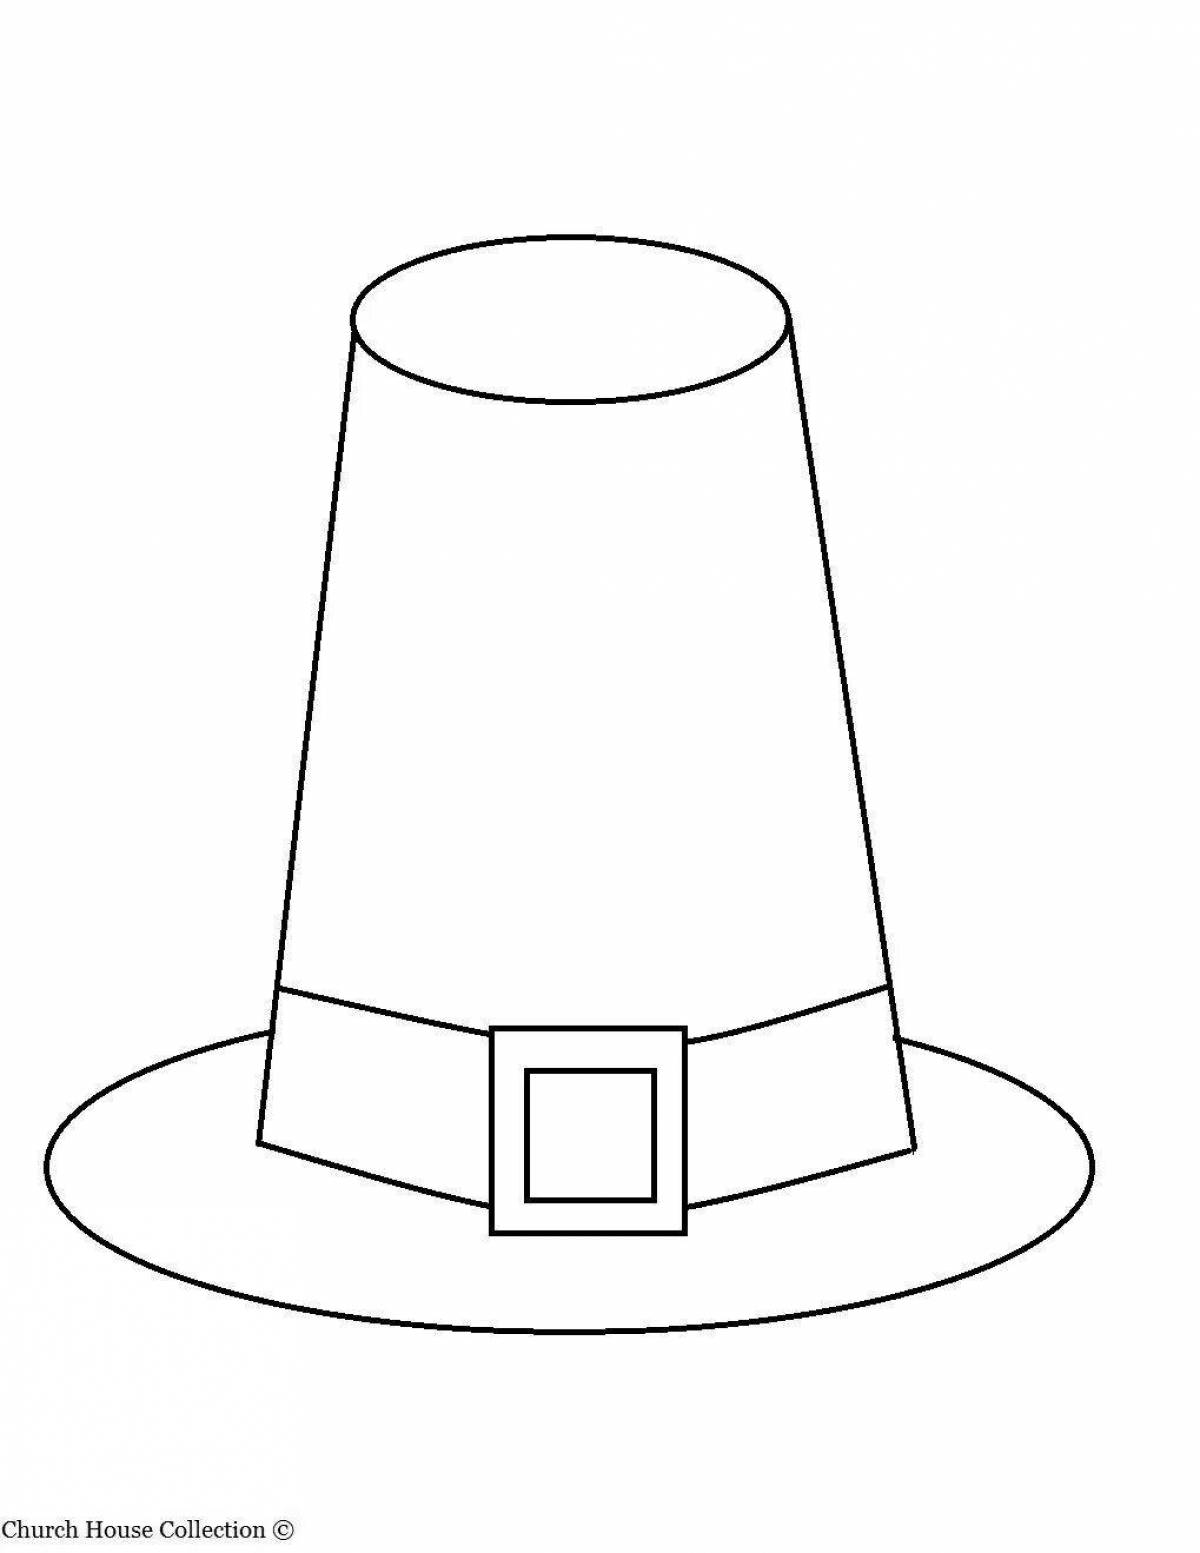 Coloring page incredible cylinder hat